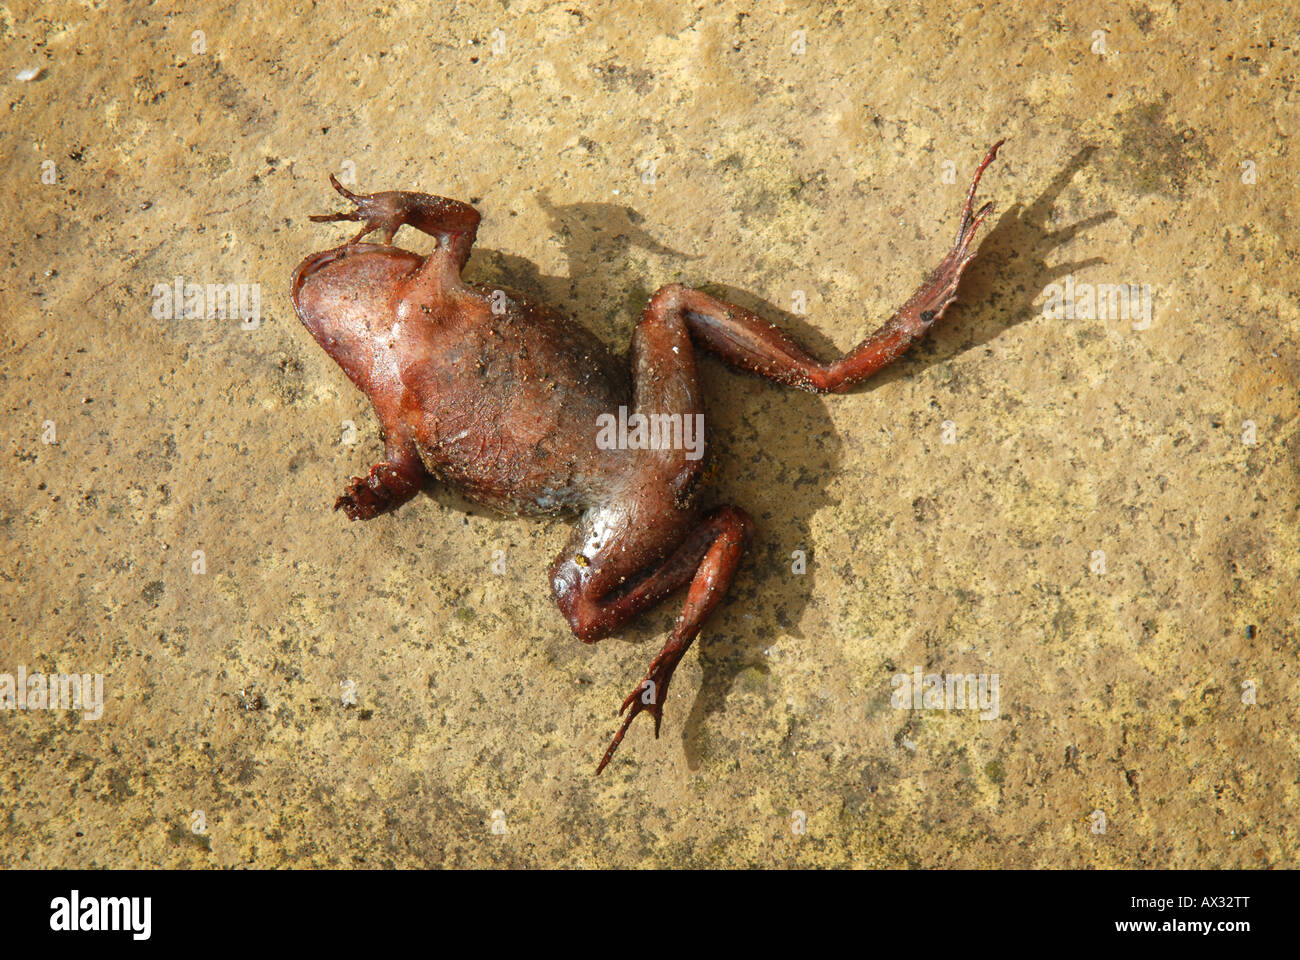 A DEAD BRITISH FROG LYING ON A PATIO SLAB IN STRONG SUNLIGHT.UK Stock Photo